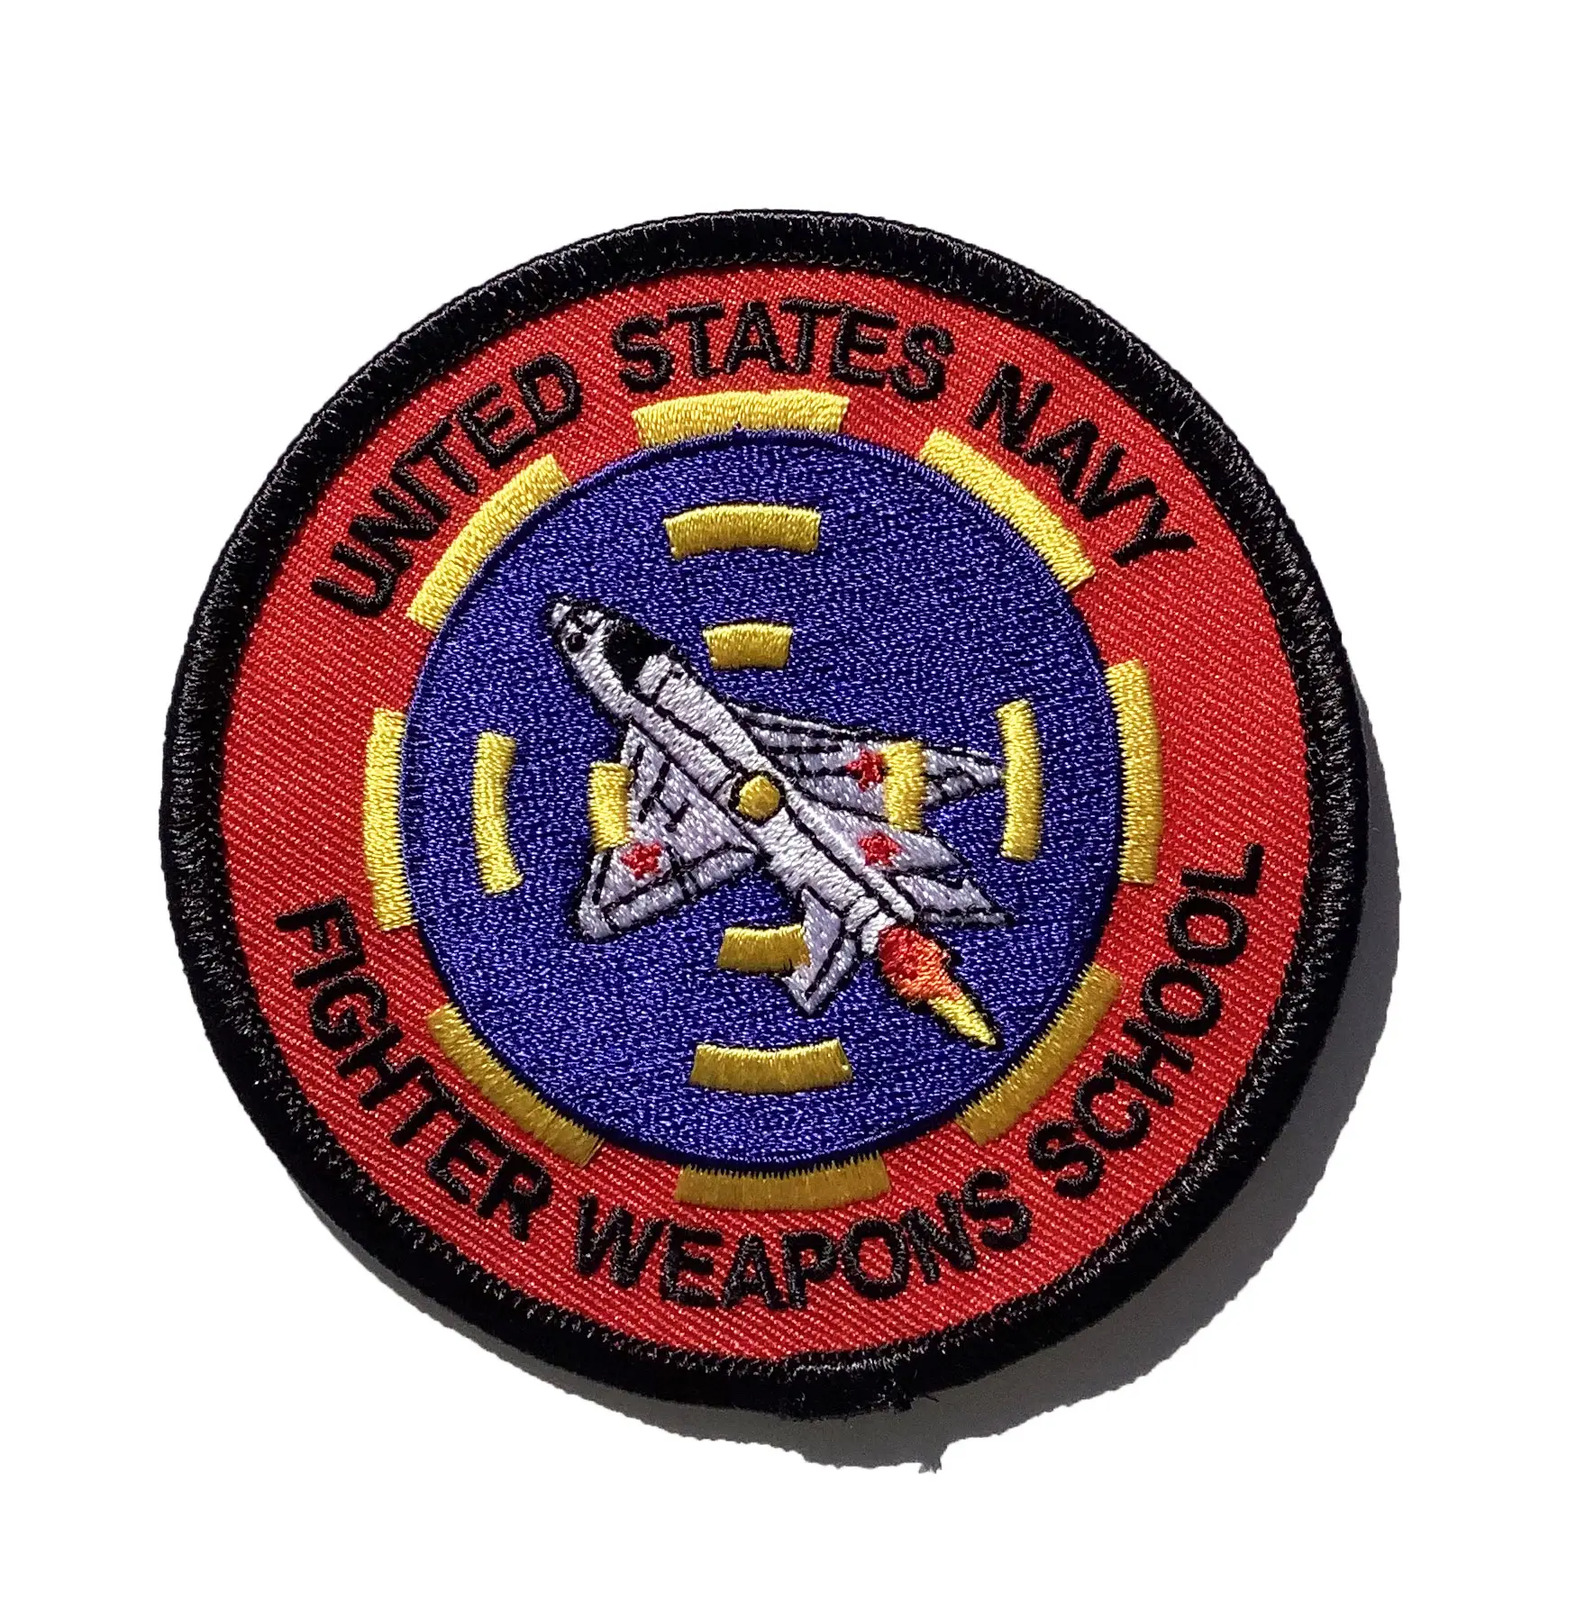 United States Navy Fighter Weapons School 'Top Gun' Patch